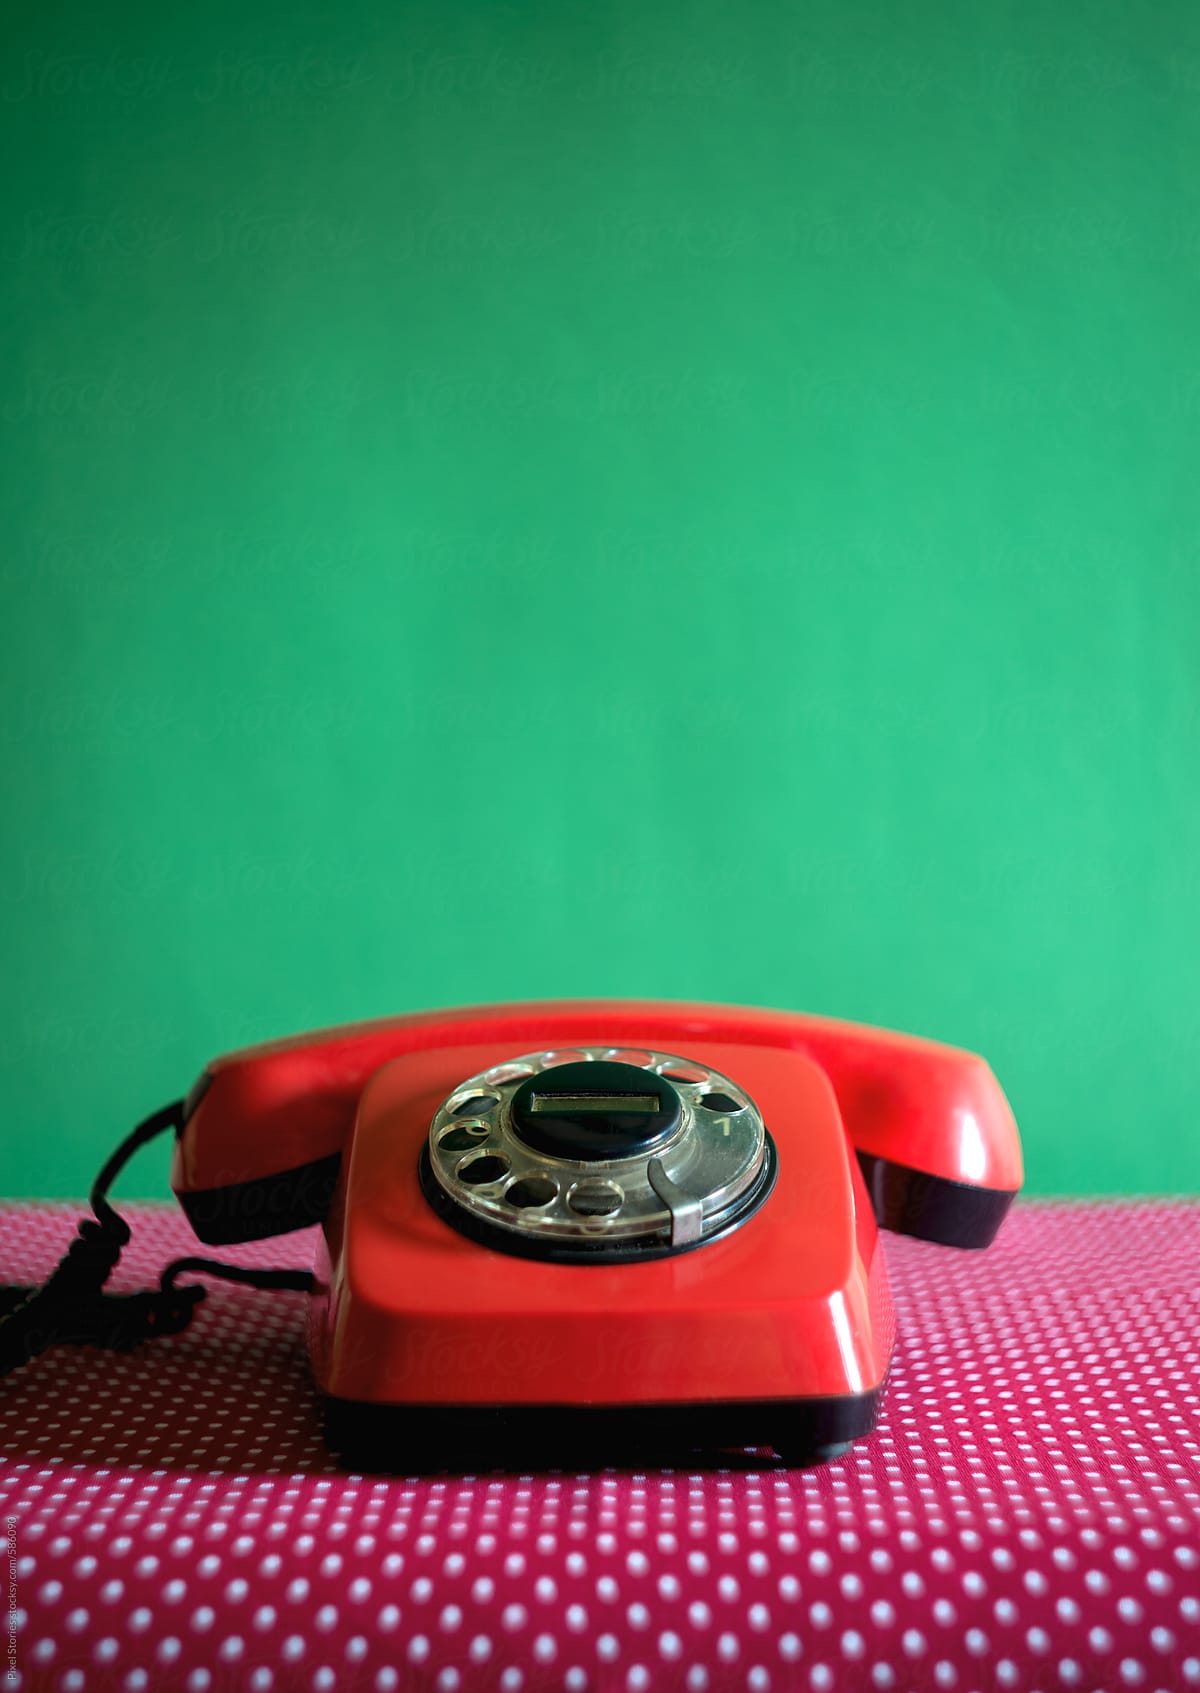 Red vintage landline phone with rotary dial